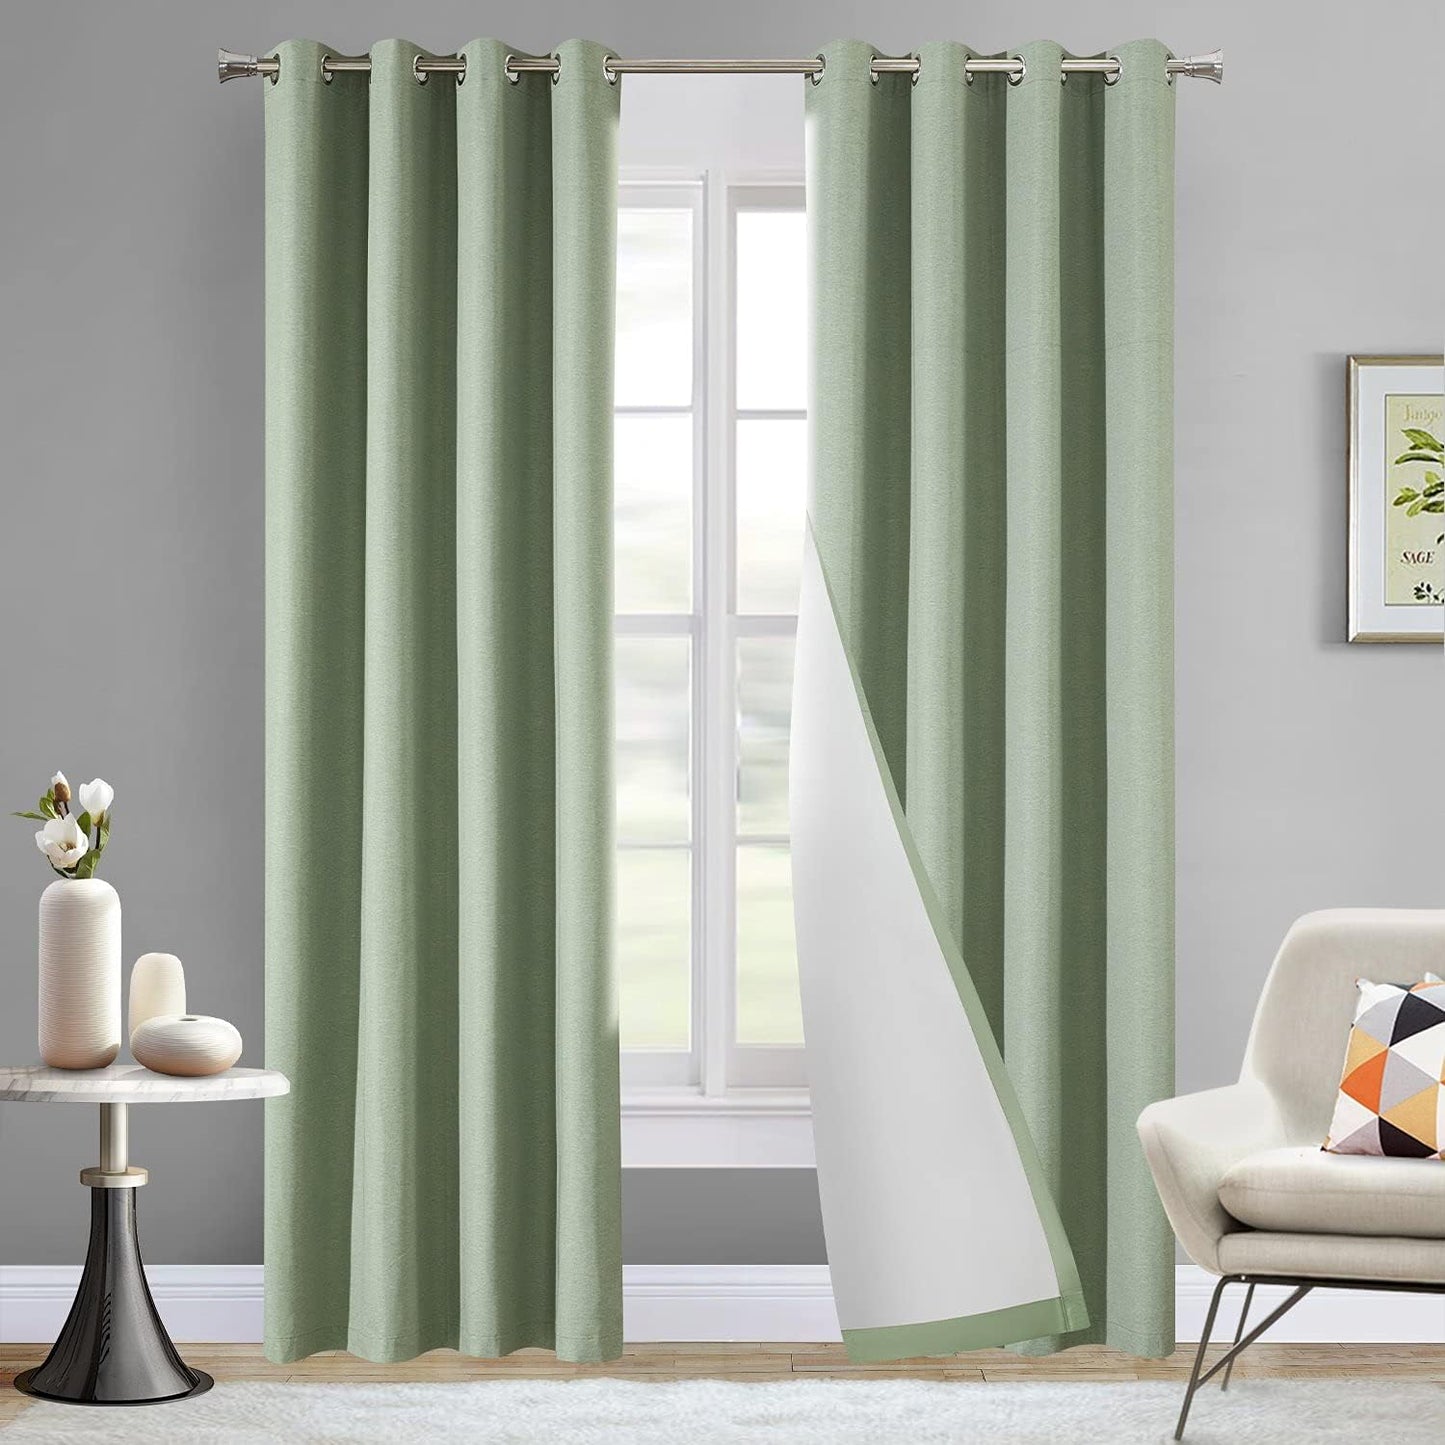 LOYOLADY Dark Grey Blackout Curtains 102 Inches Long 2 Panels Set Thermal Insulated Curtains for Living Room Grommet Noise Reduce Curtains for Bedroom 52" W X 102" L  LoyoLady Home Textiles Avocado 100 Blackout Curtains, Grommet 2 X ( 72" W X 84" L ) 